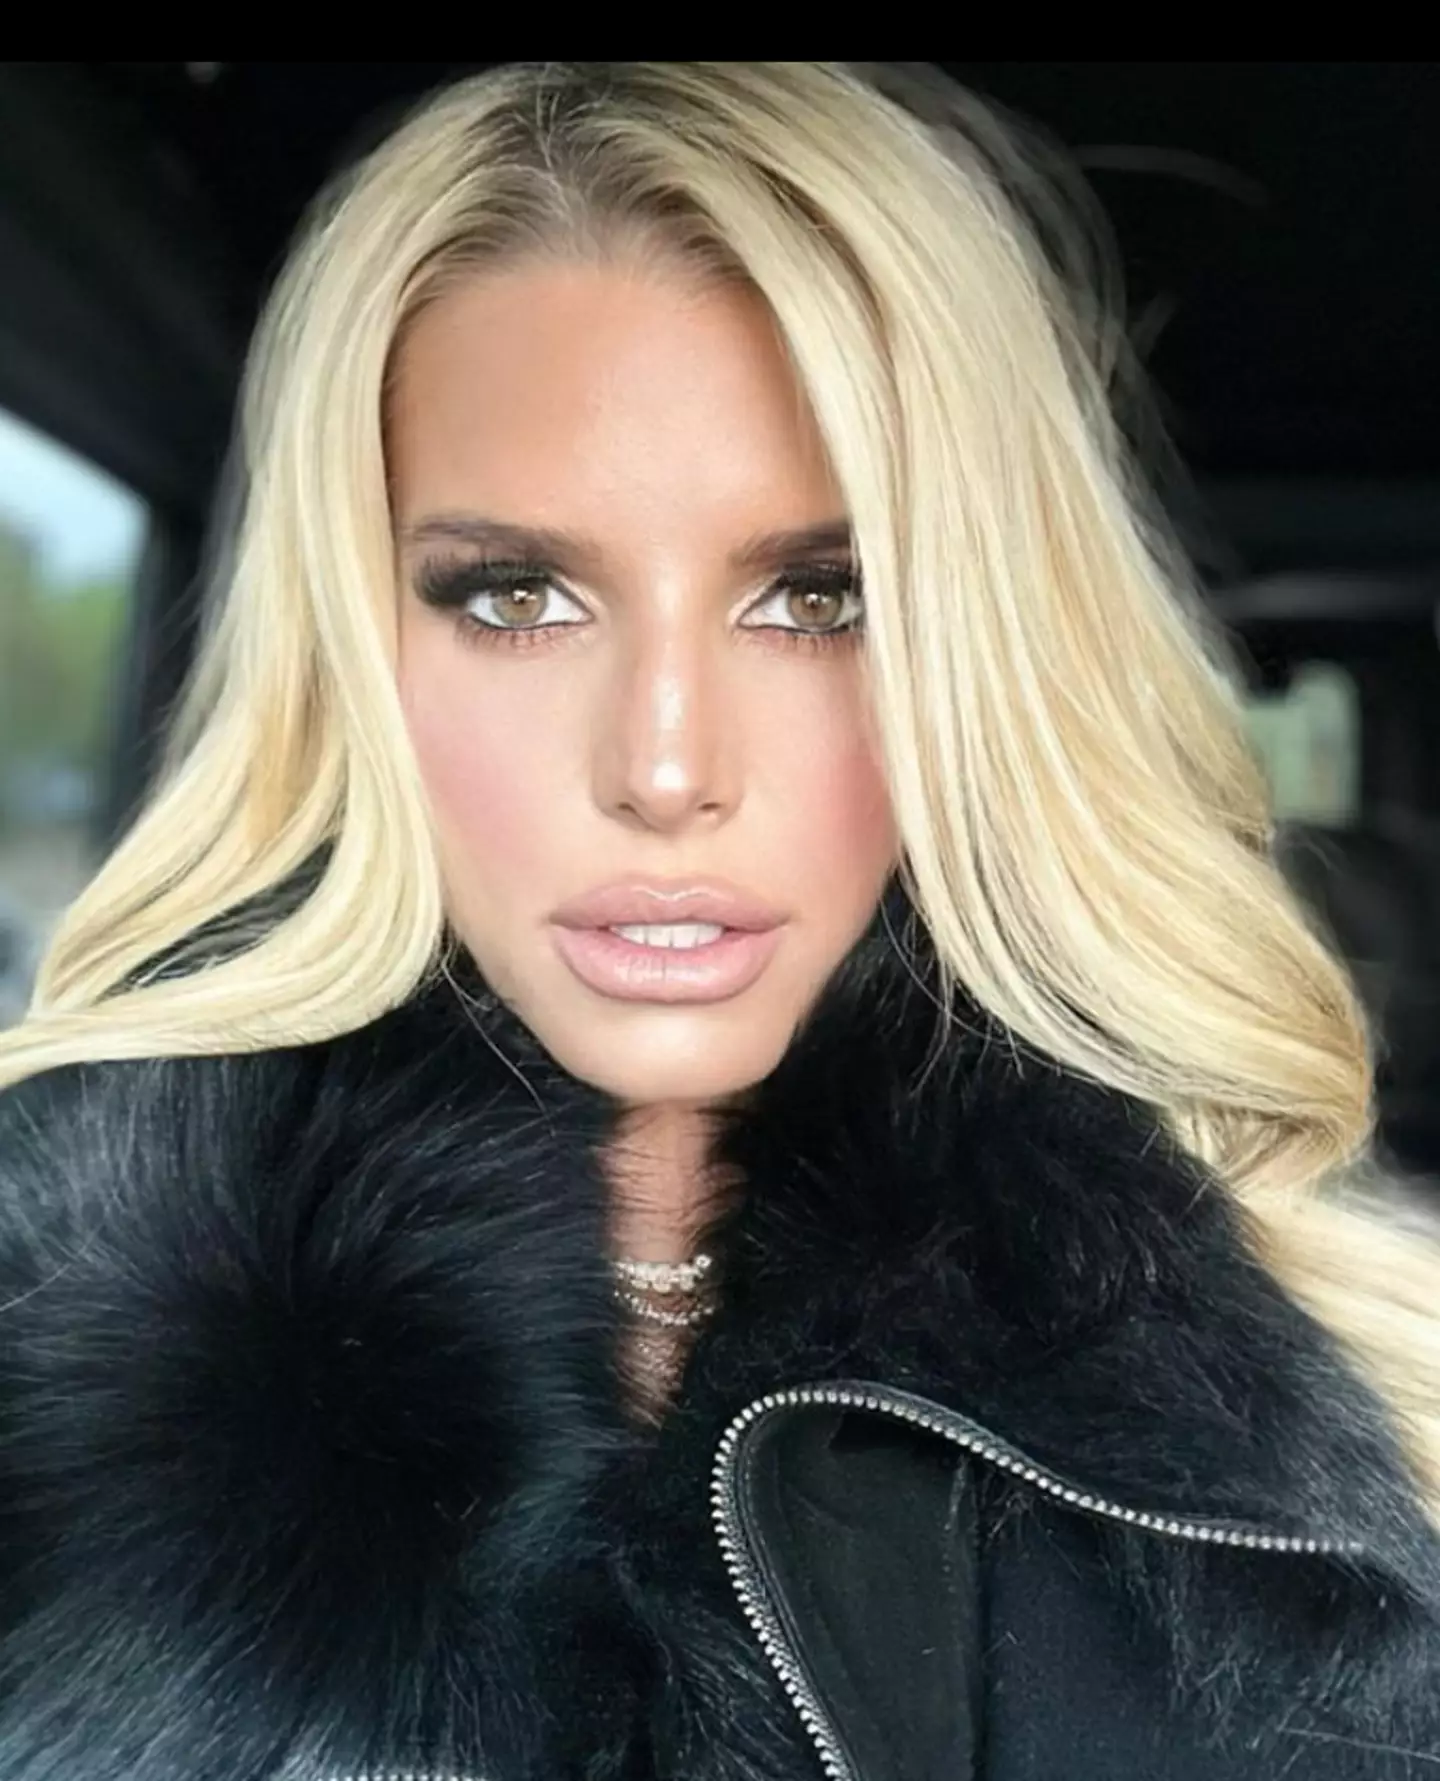 Jessica Simpson shared a youthful-looking selfie.